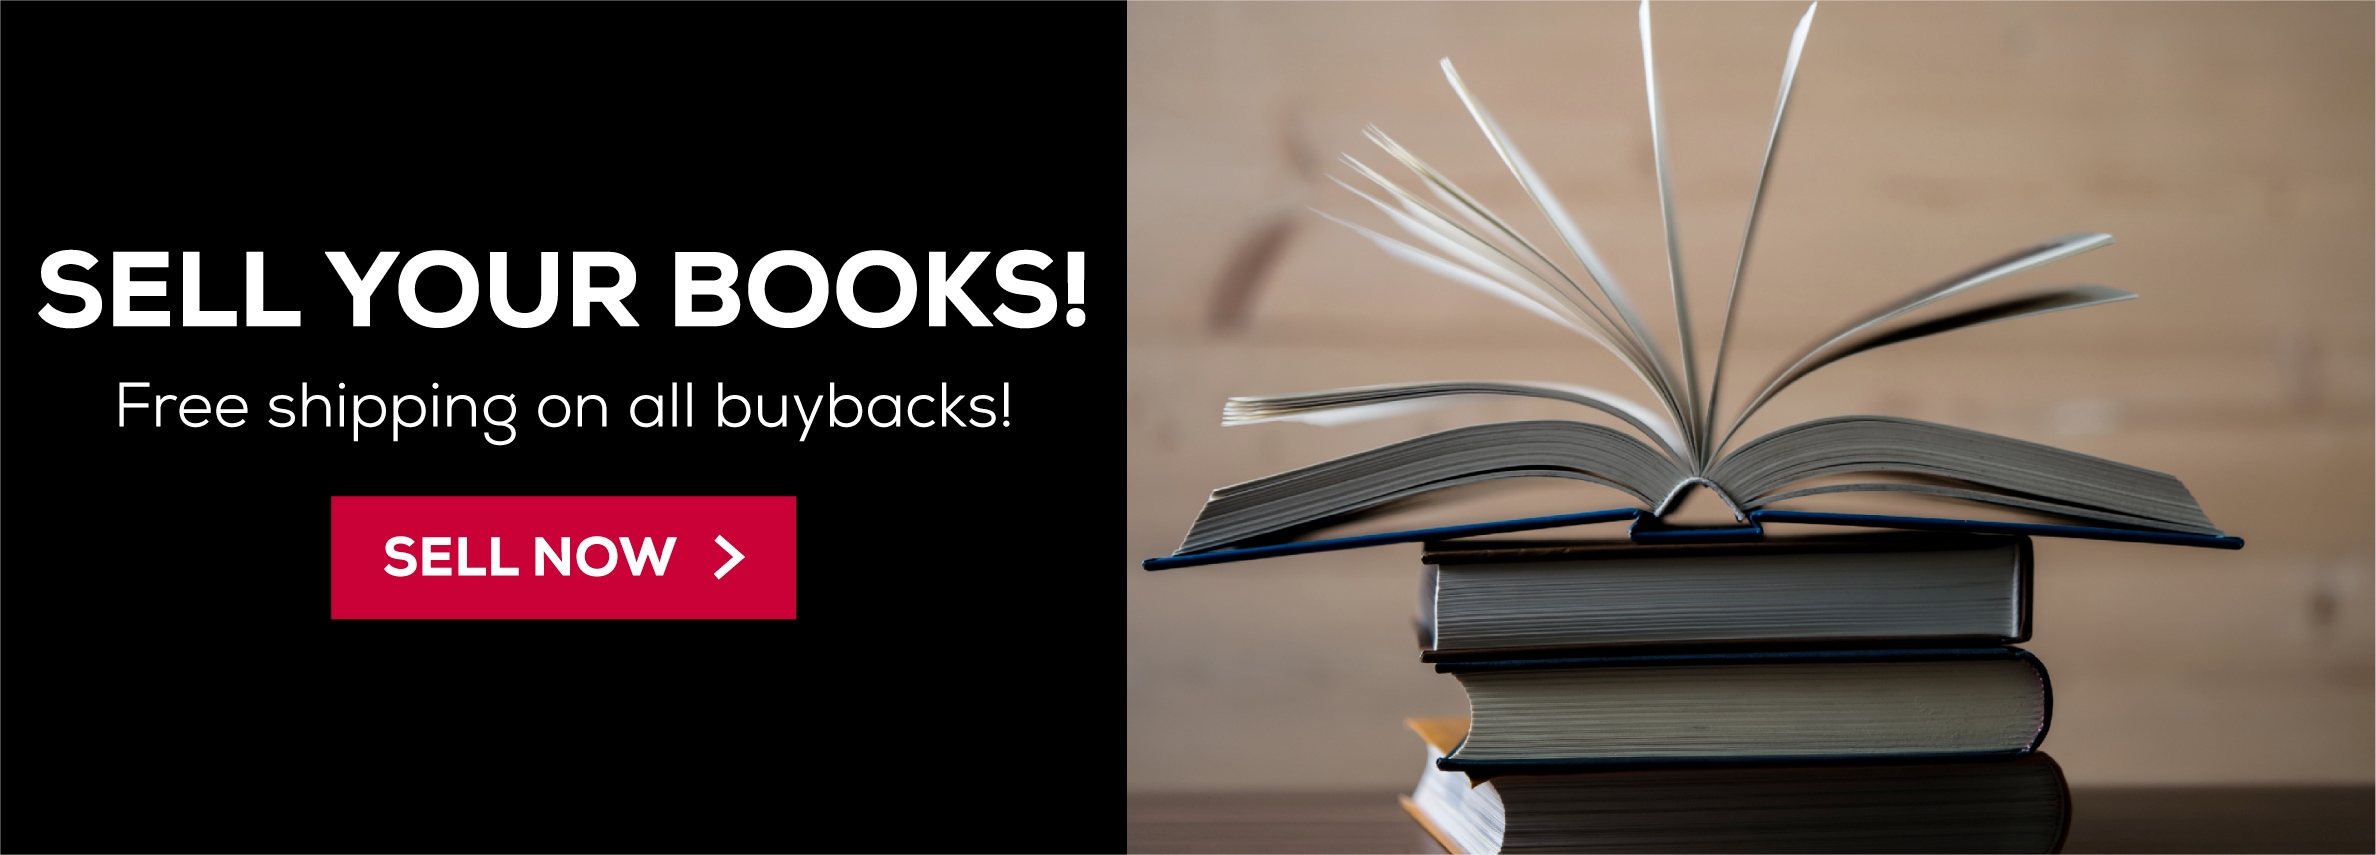 Sell Your Books! Free shipping on all buybacks! Sell Now